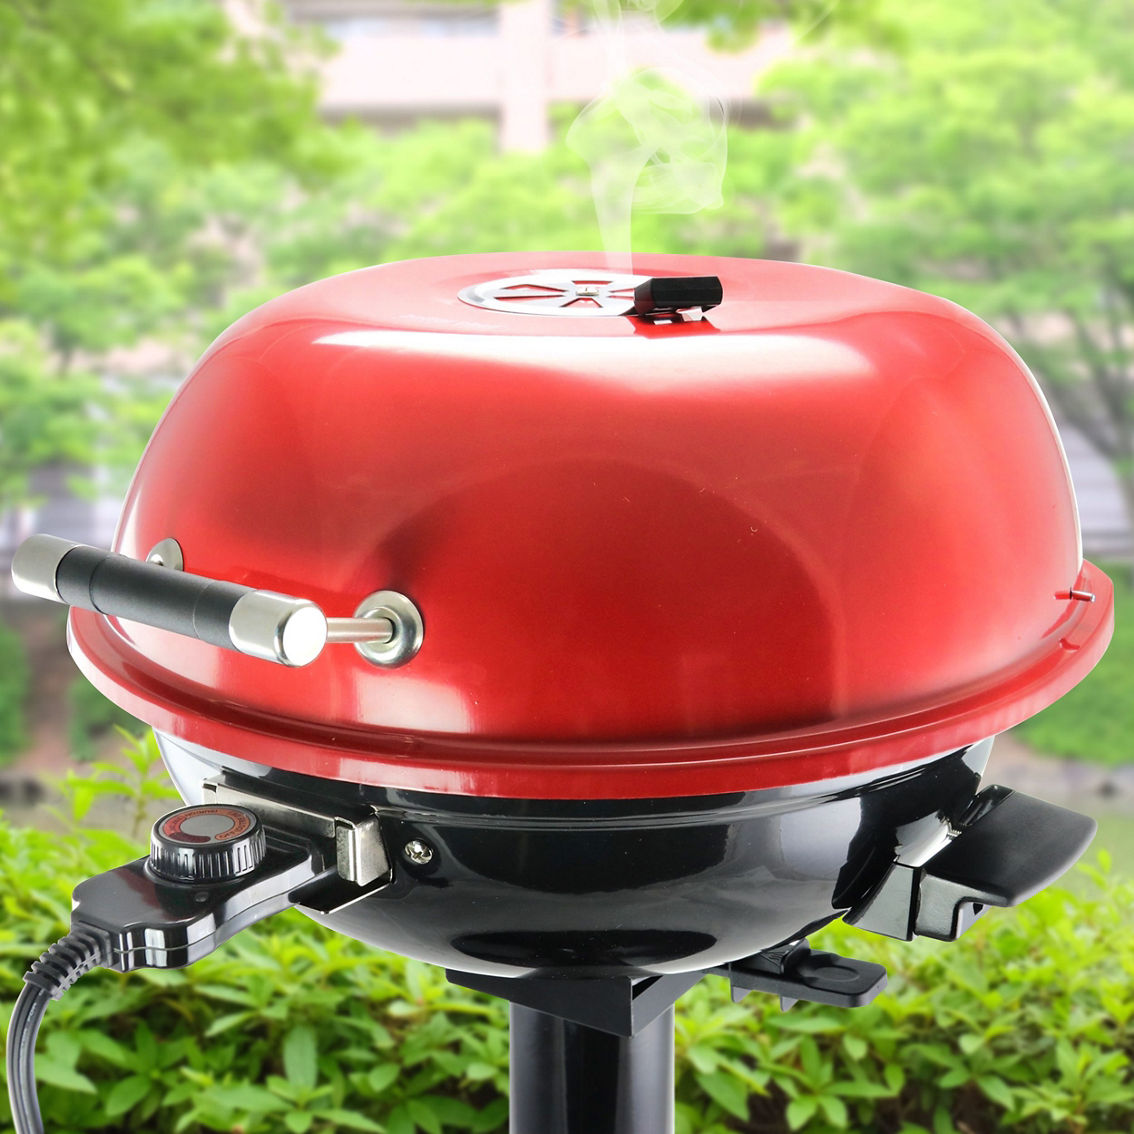 Better Chef 15-inch Electric Barbecue Grill - Image 2 of 5